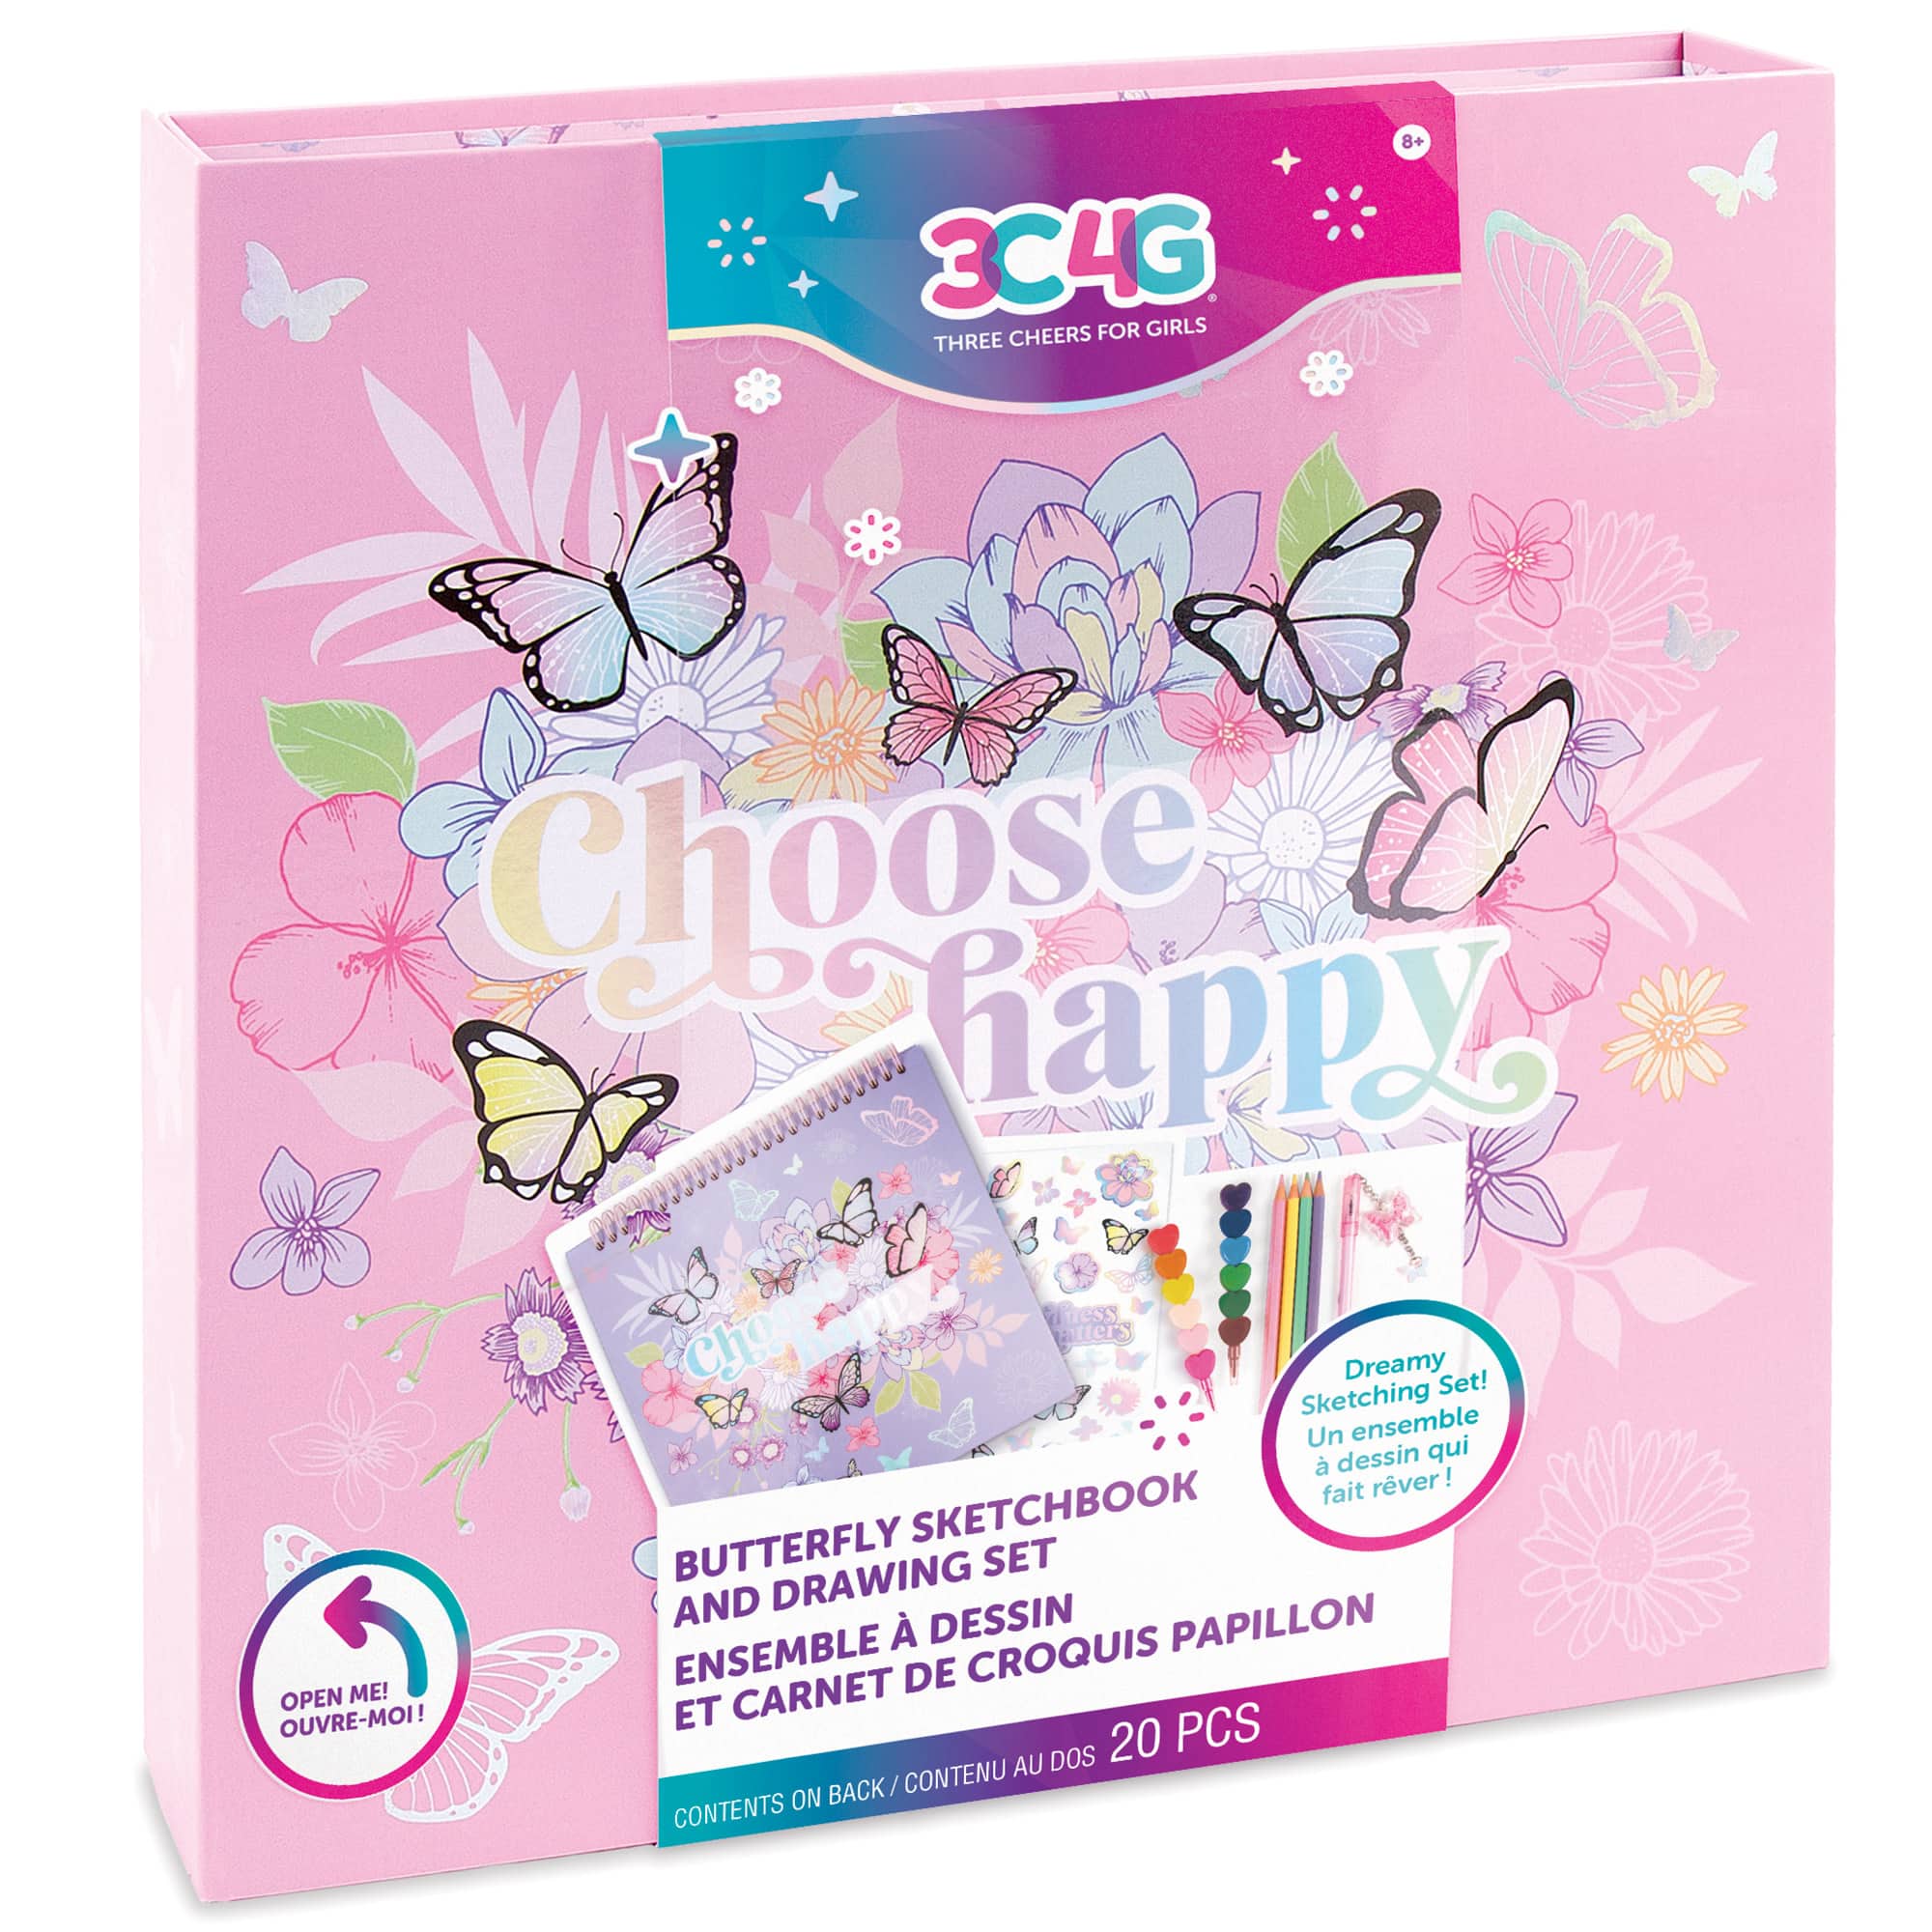 Make It Real 3C4G: Butterfly Sketchbook &#x26; Drawing Set, 20pcs